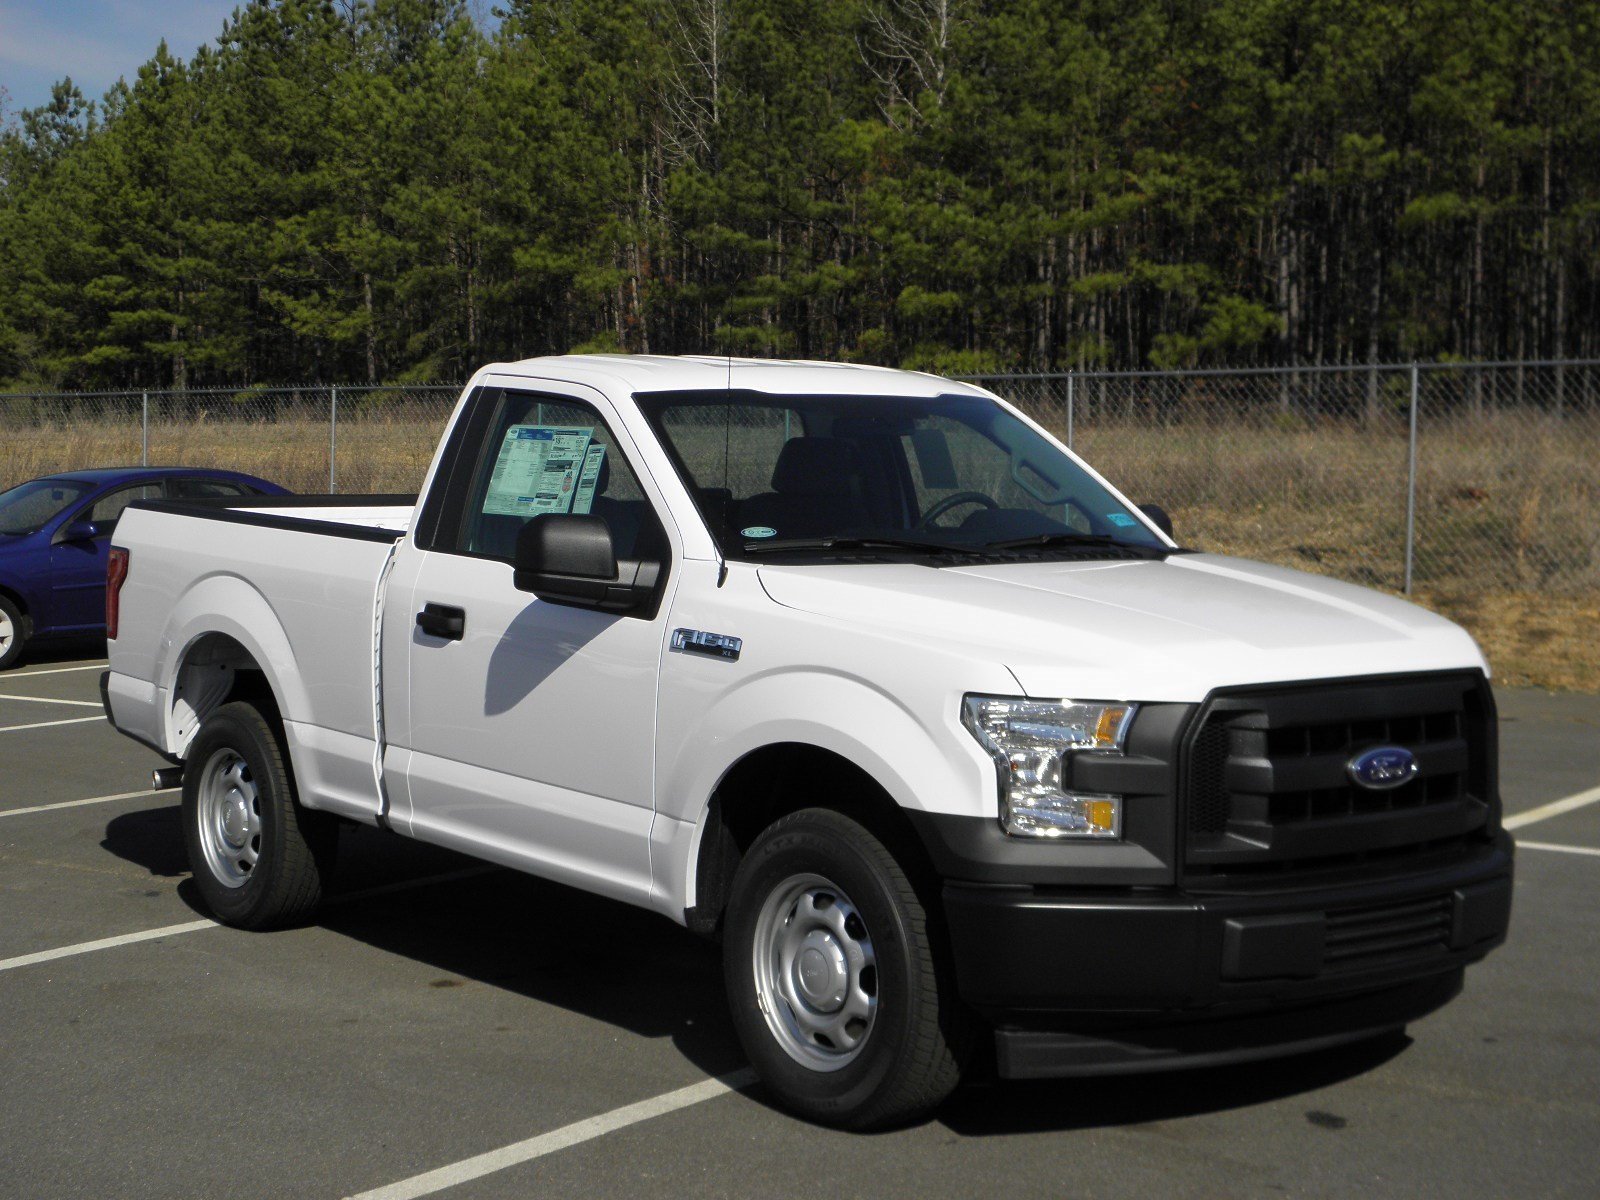 New 2017 Ford F-150 XL Regular Cab Pickup in Milledgeville #F17114